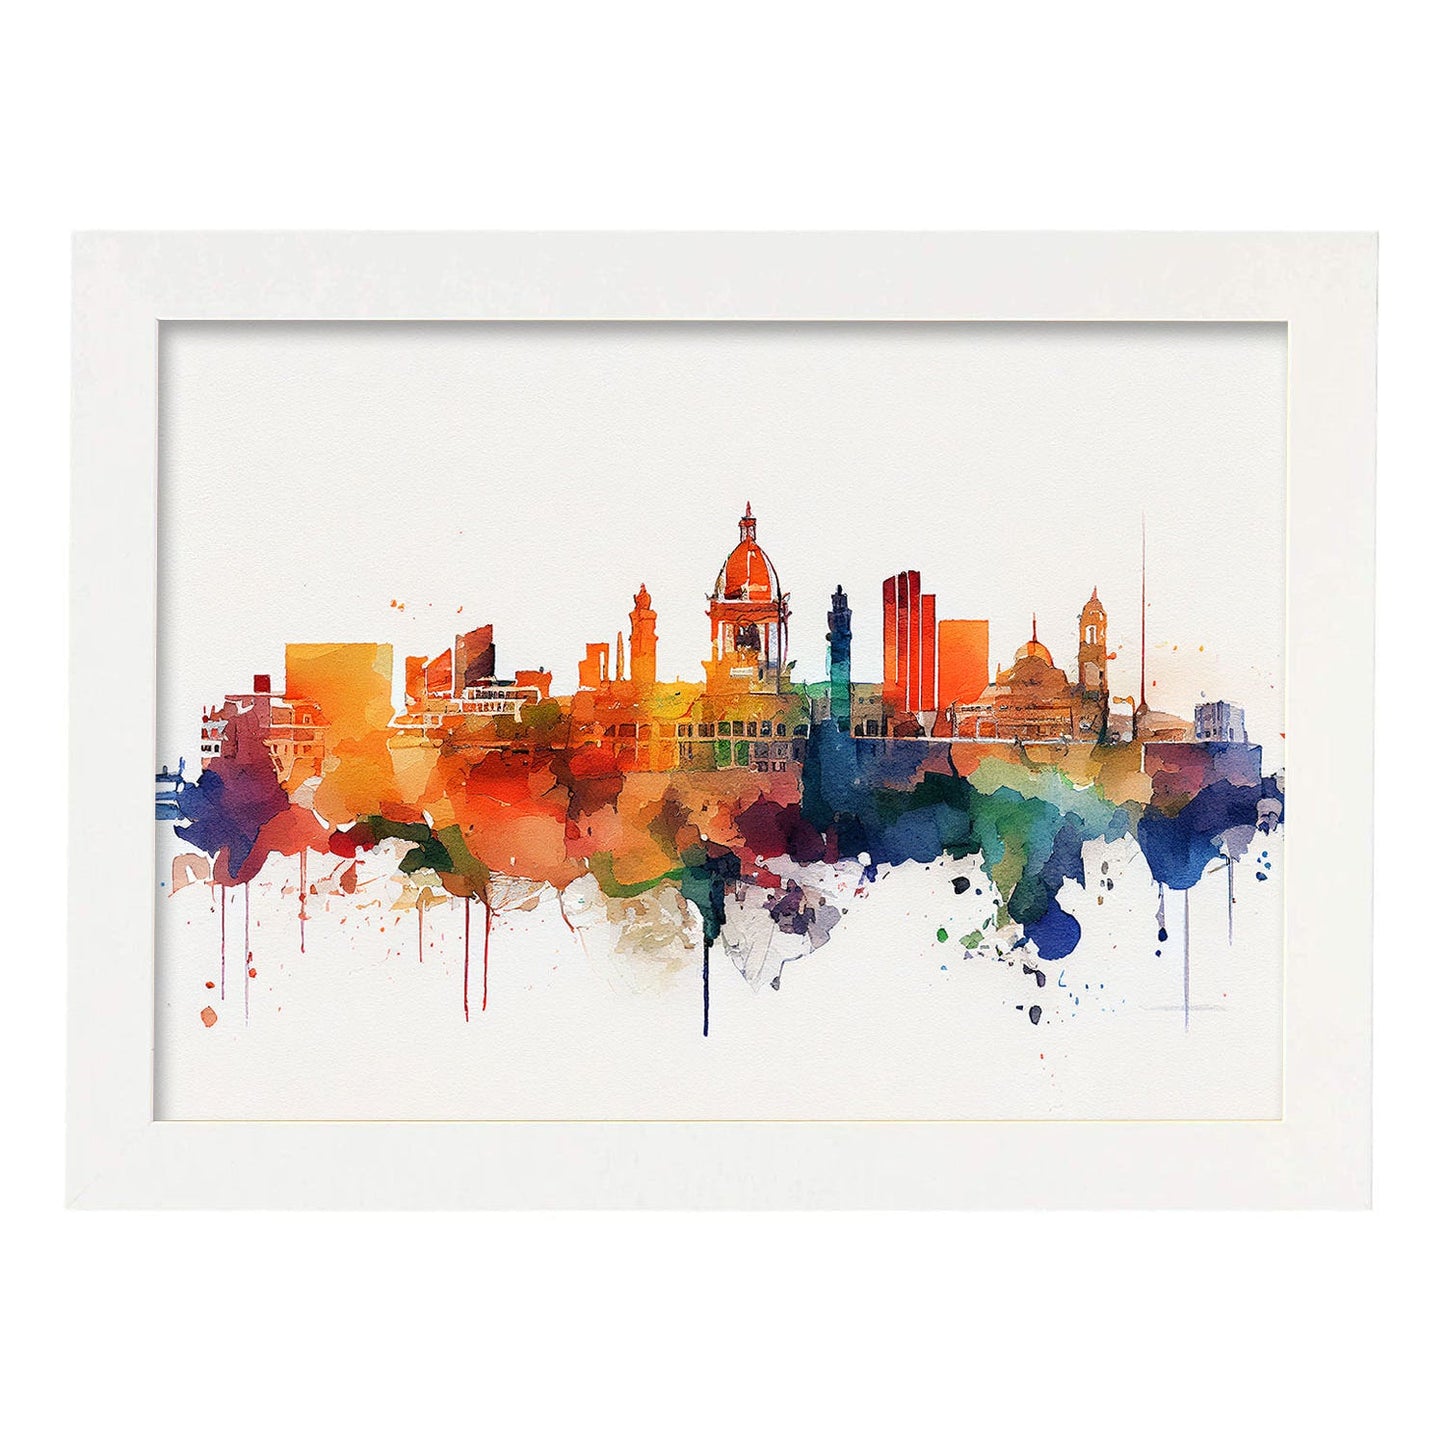 Nacnic watercolor of a skyline of the city of Valencia_2. Aesthetic Wall Art Prints for Bedroom or Living Room Design.-Artwork-Nacnic-A4-Marco Blanco-Nacnic Estudio SL